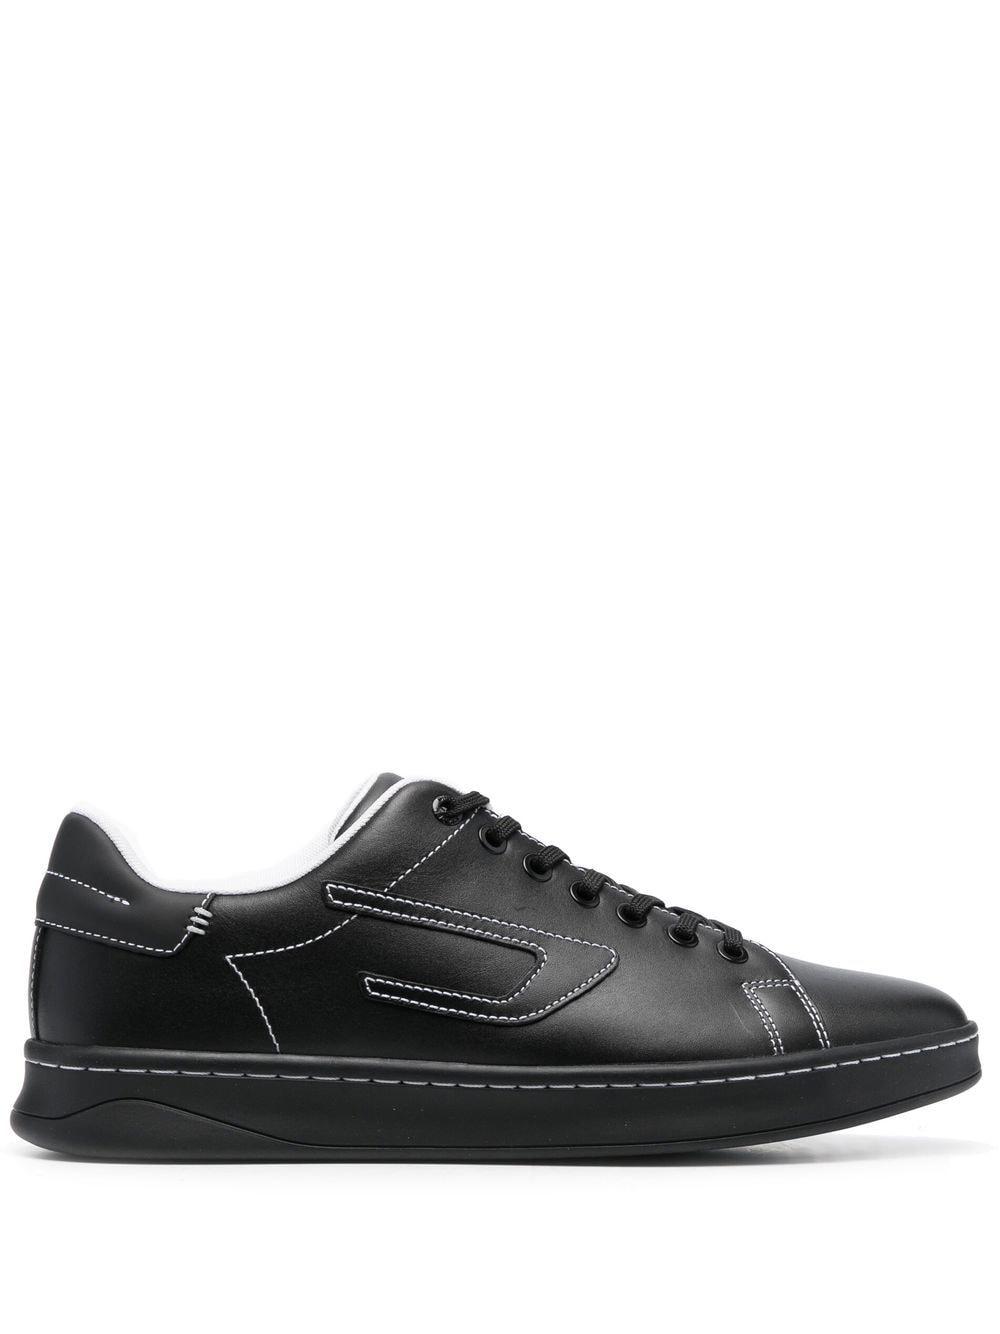 DIESEL S-athene Leather Low-top Trainers in Black for Men | Lyst